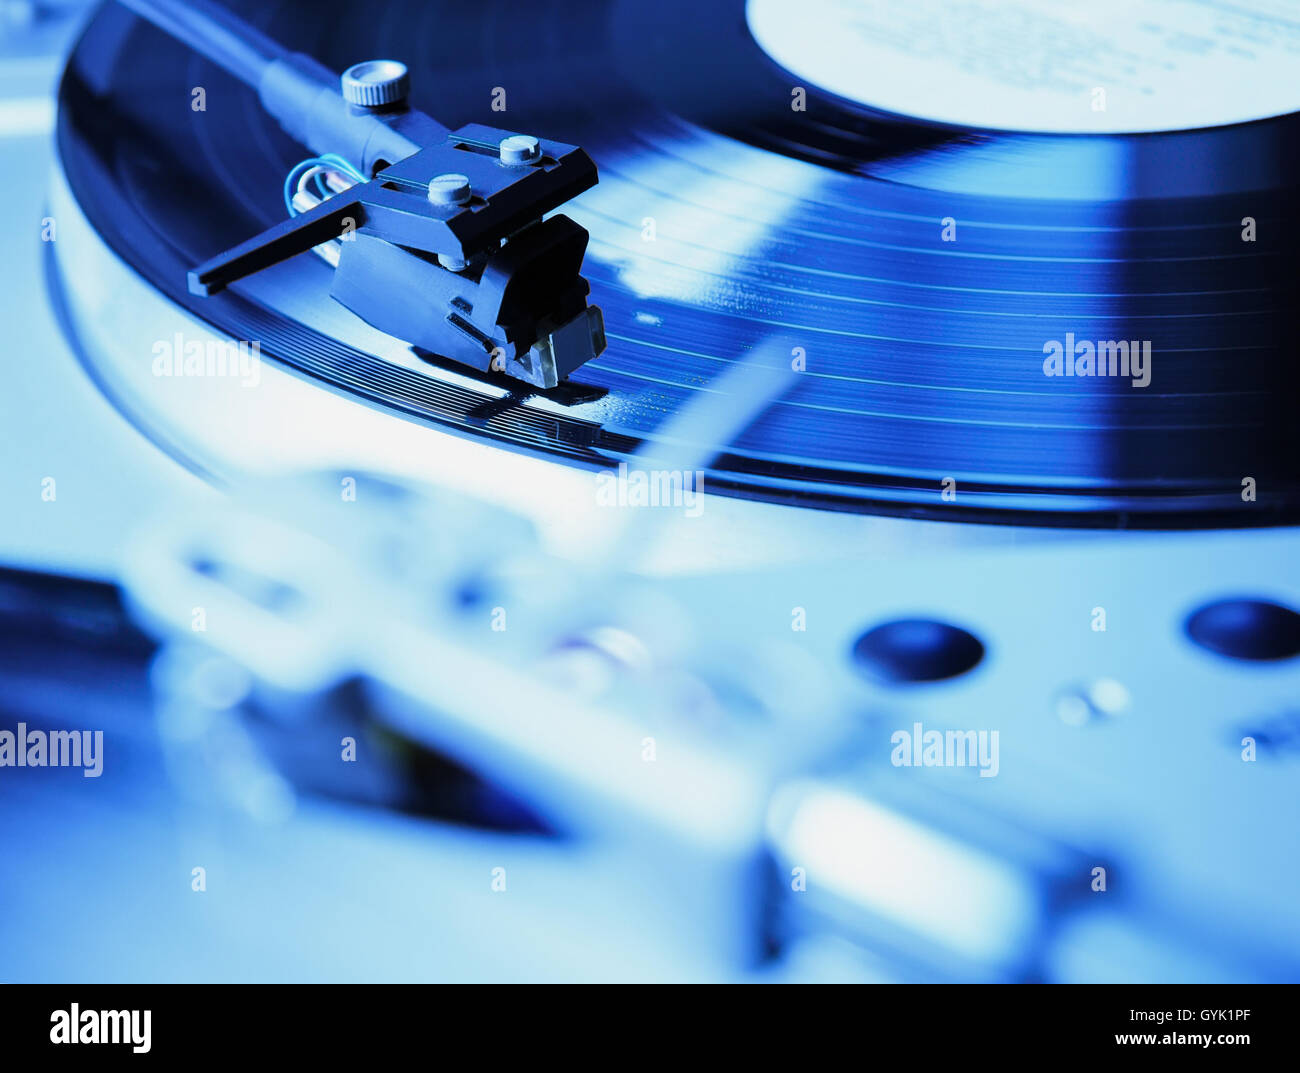 Turntable playing vinyl record with music. Useful equipment for DJ, nightclub and retro hipster theme or audio enthusiast. Vibrant blue color Stock Photo